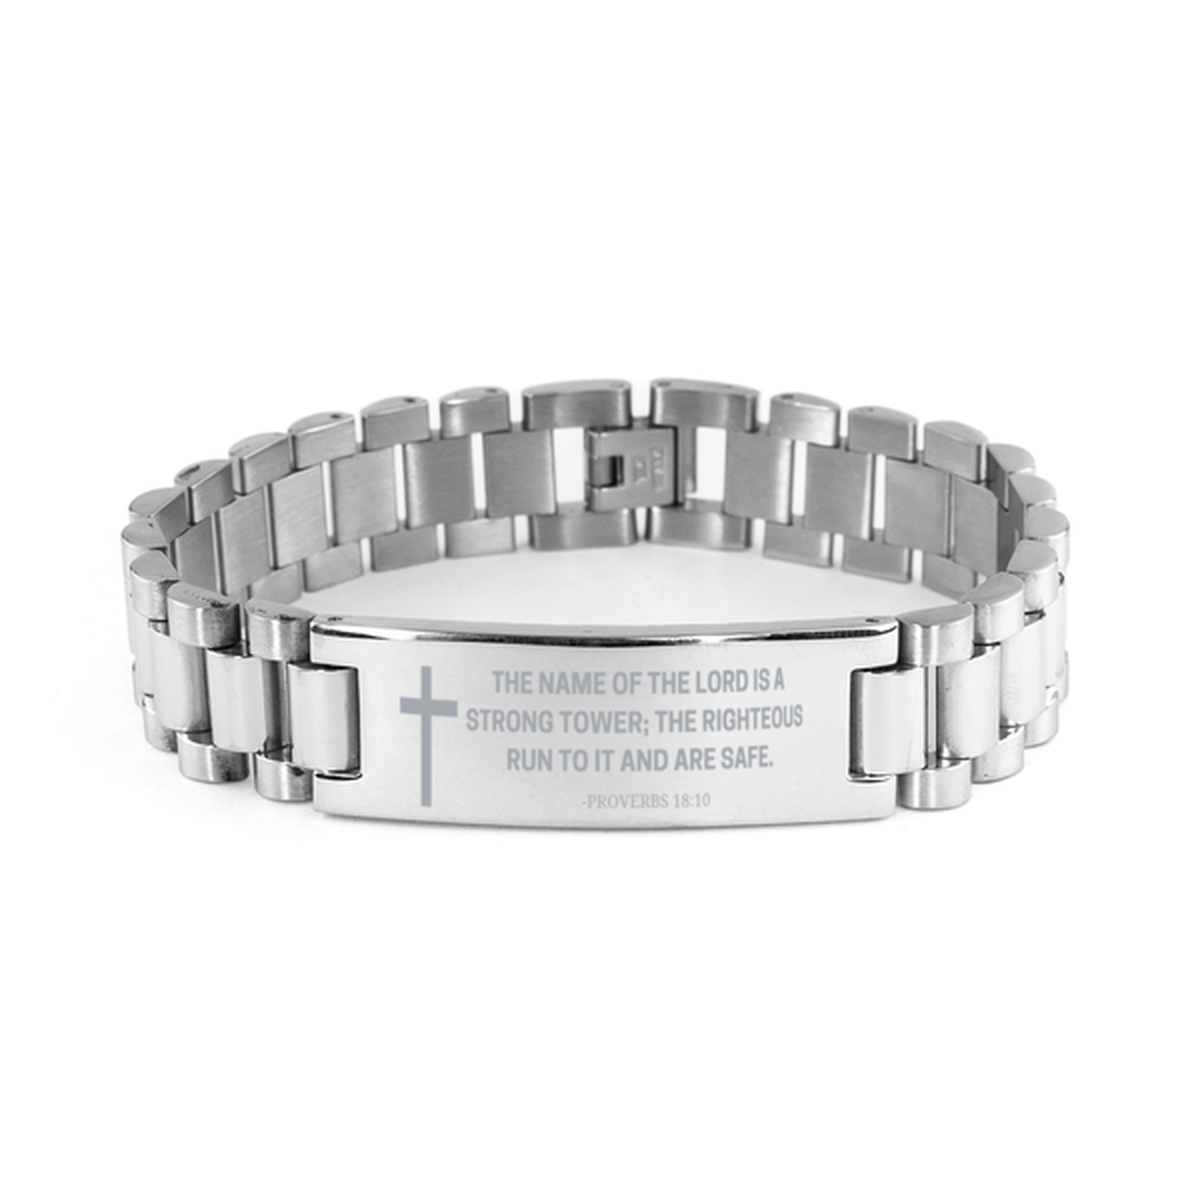 Baptism Gifts For Teenage Boys Girls, Christian Bible Verse Ladder Stainless Steel Bracelet, The name of the Lord is a strong, Catholic Confirmation Gifts for Son, Godson, Grandson, Nephew